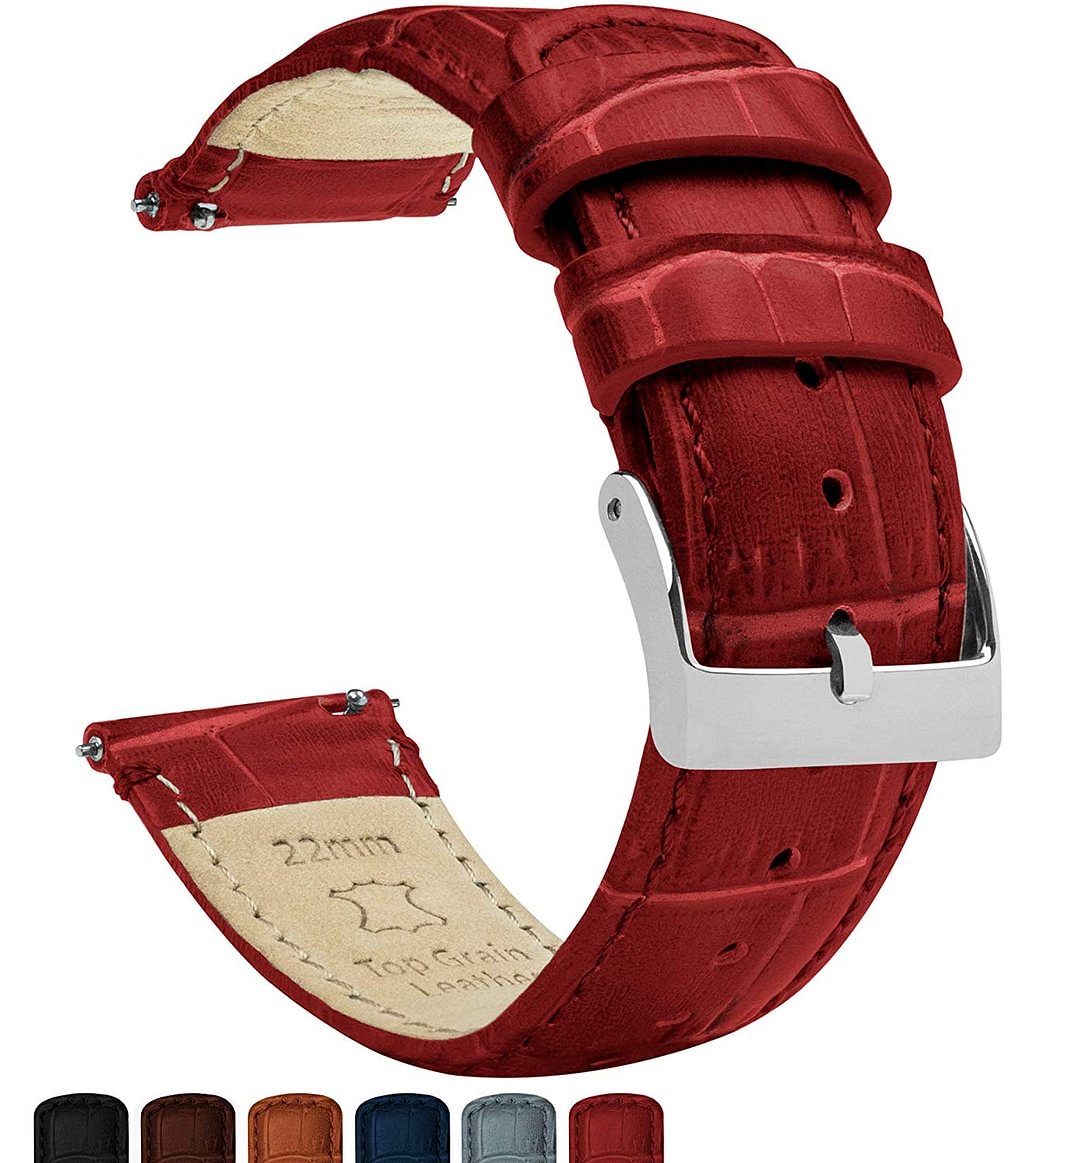 Watch Bands - Alligator Grain Leather - Quick Release Leather Watch Bands